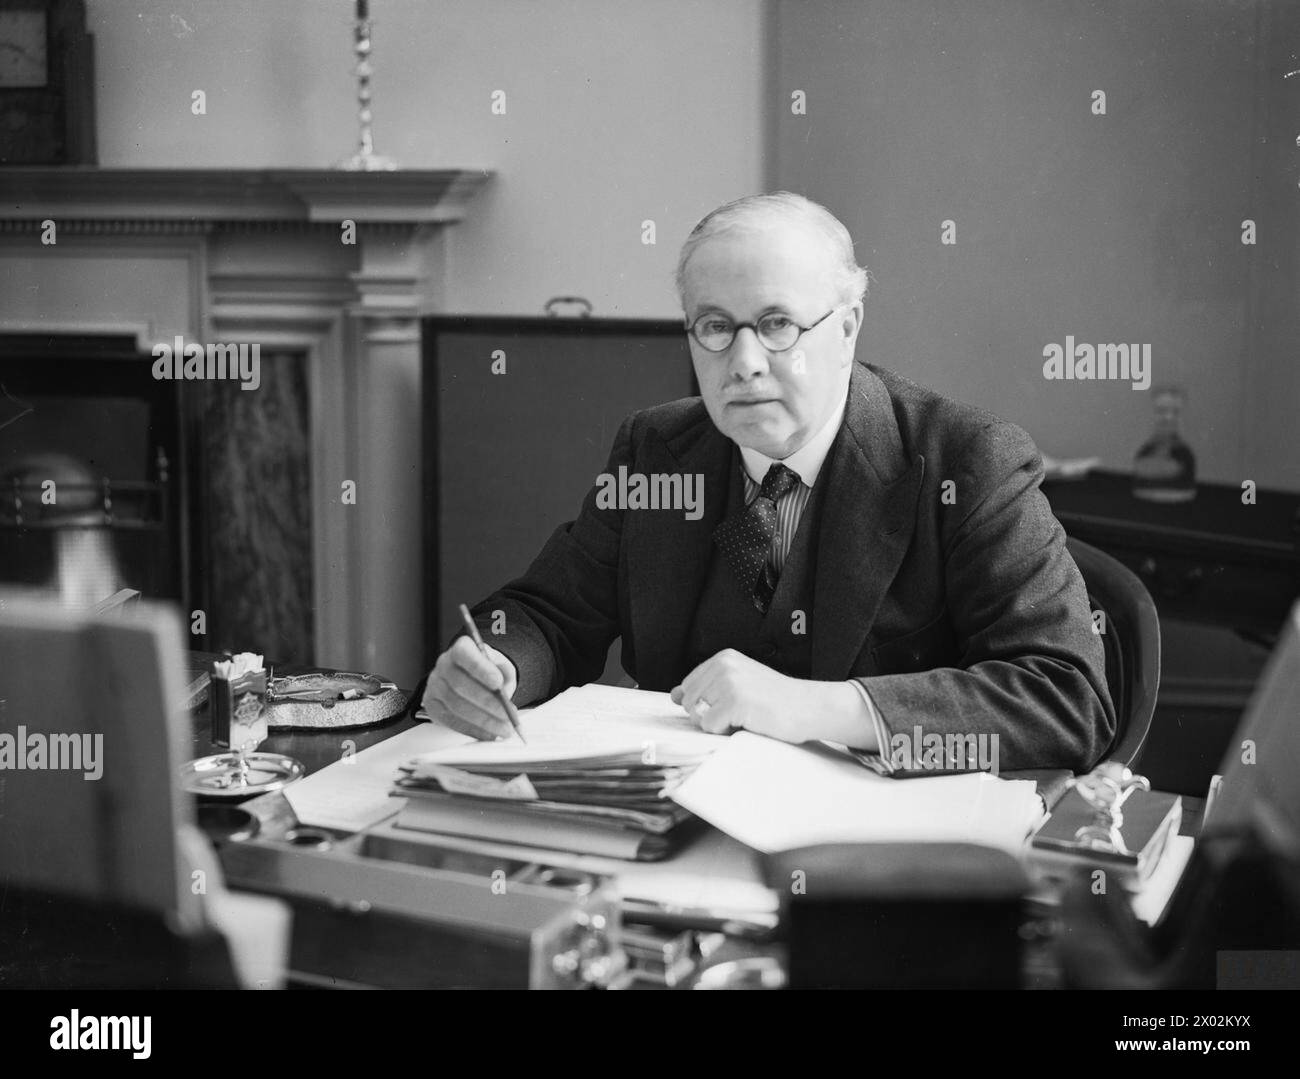 BRITISH POLITICAL PERSONALITIES 1936-1945 - The Neville Chamberlain War Cabinet 3 September 1939 - 10 May 1940: Sir Kingsley Wood, the Secretary of State for Air from September 1939 to April 1940, seated at his desk at the Air Ministry  Kingsley Wood, Howard Stock Photo